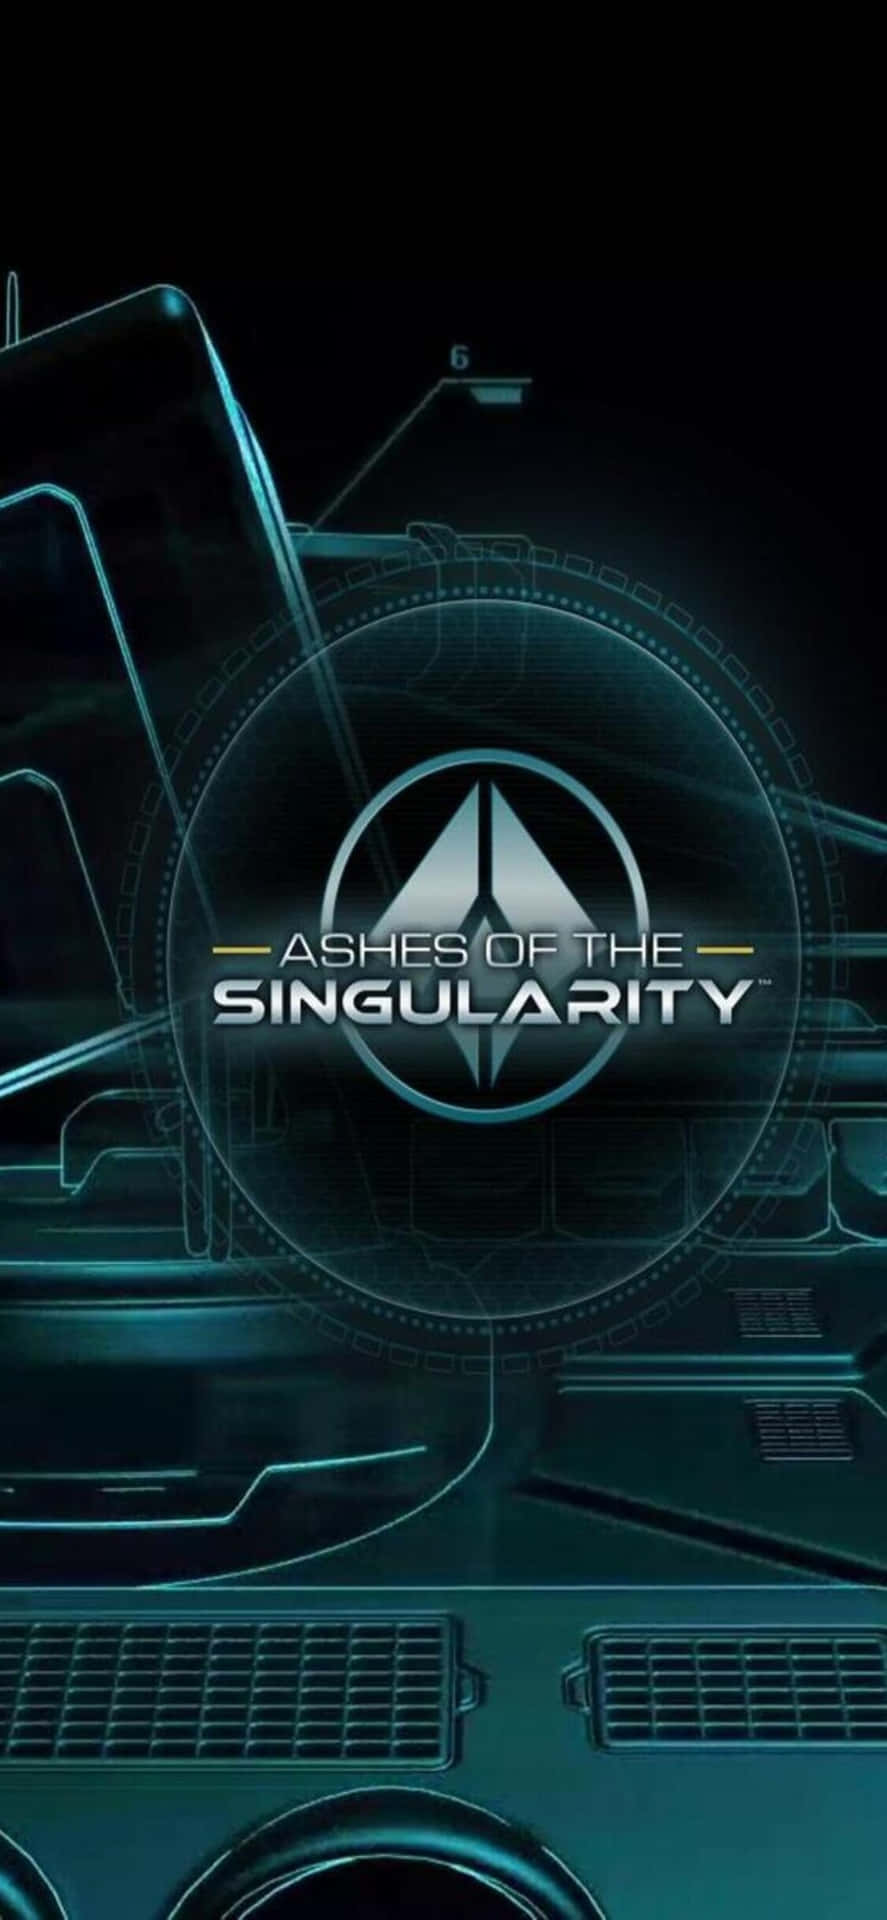 Experience the Beauty of Ashes Of The Singularity on iPhone X